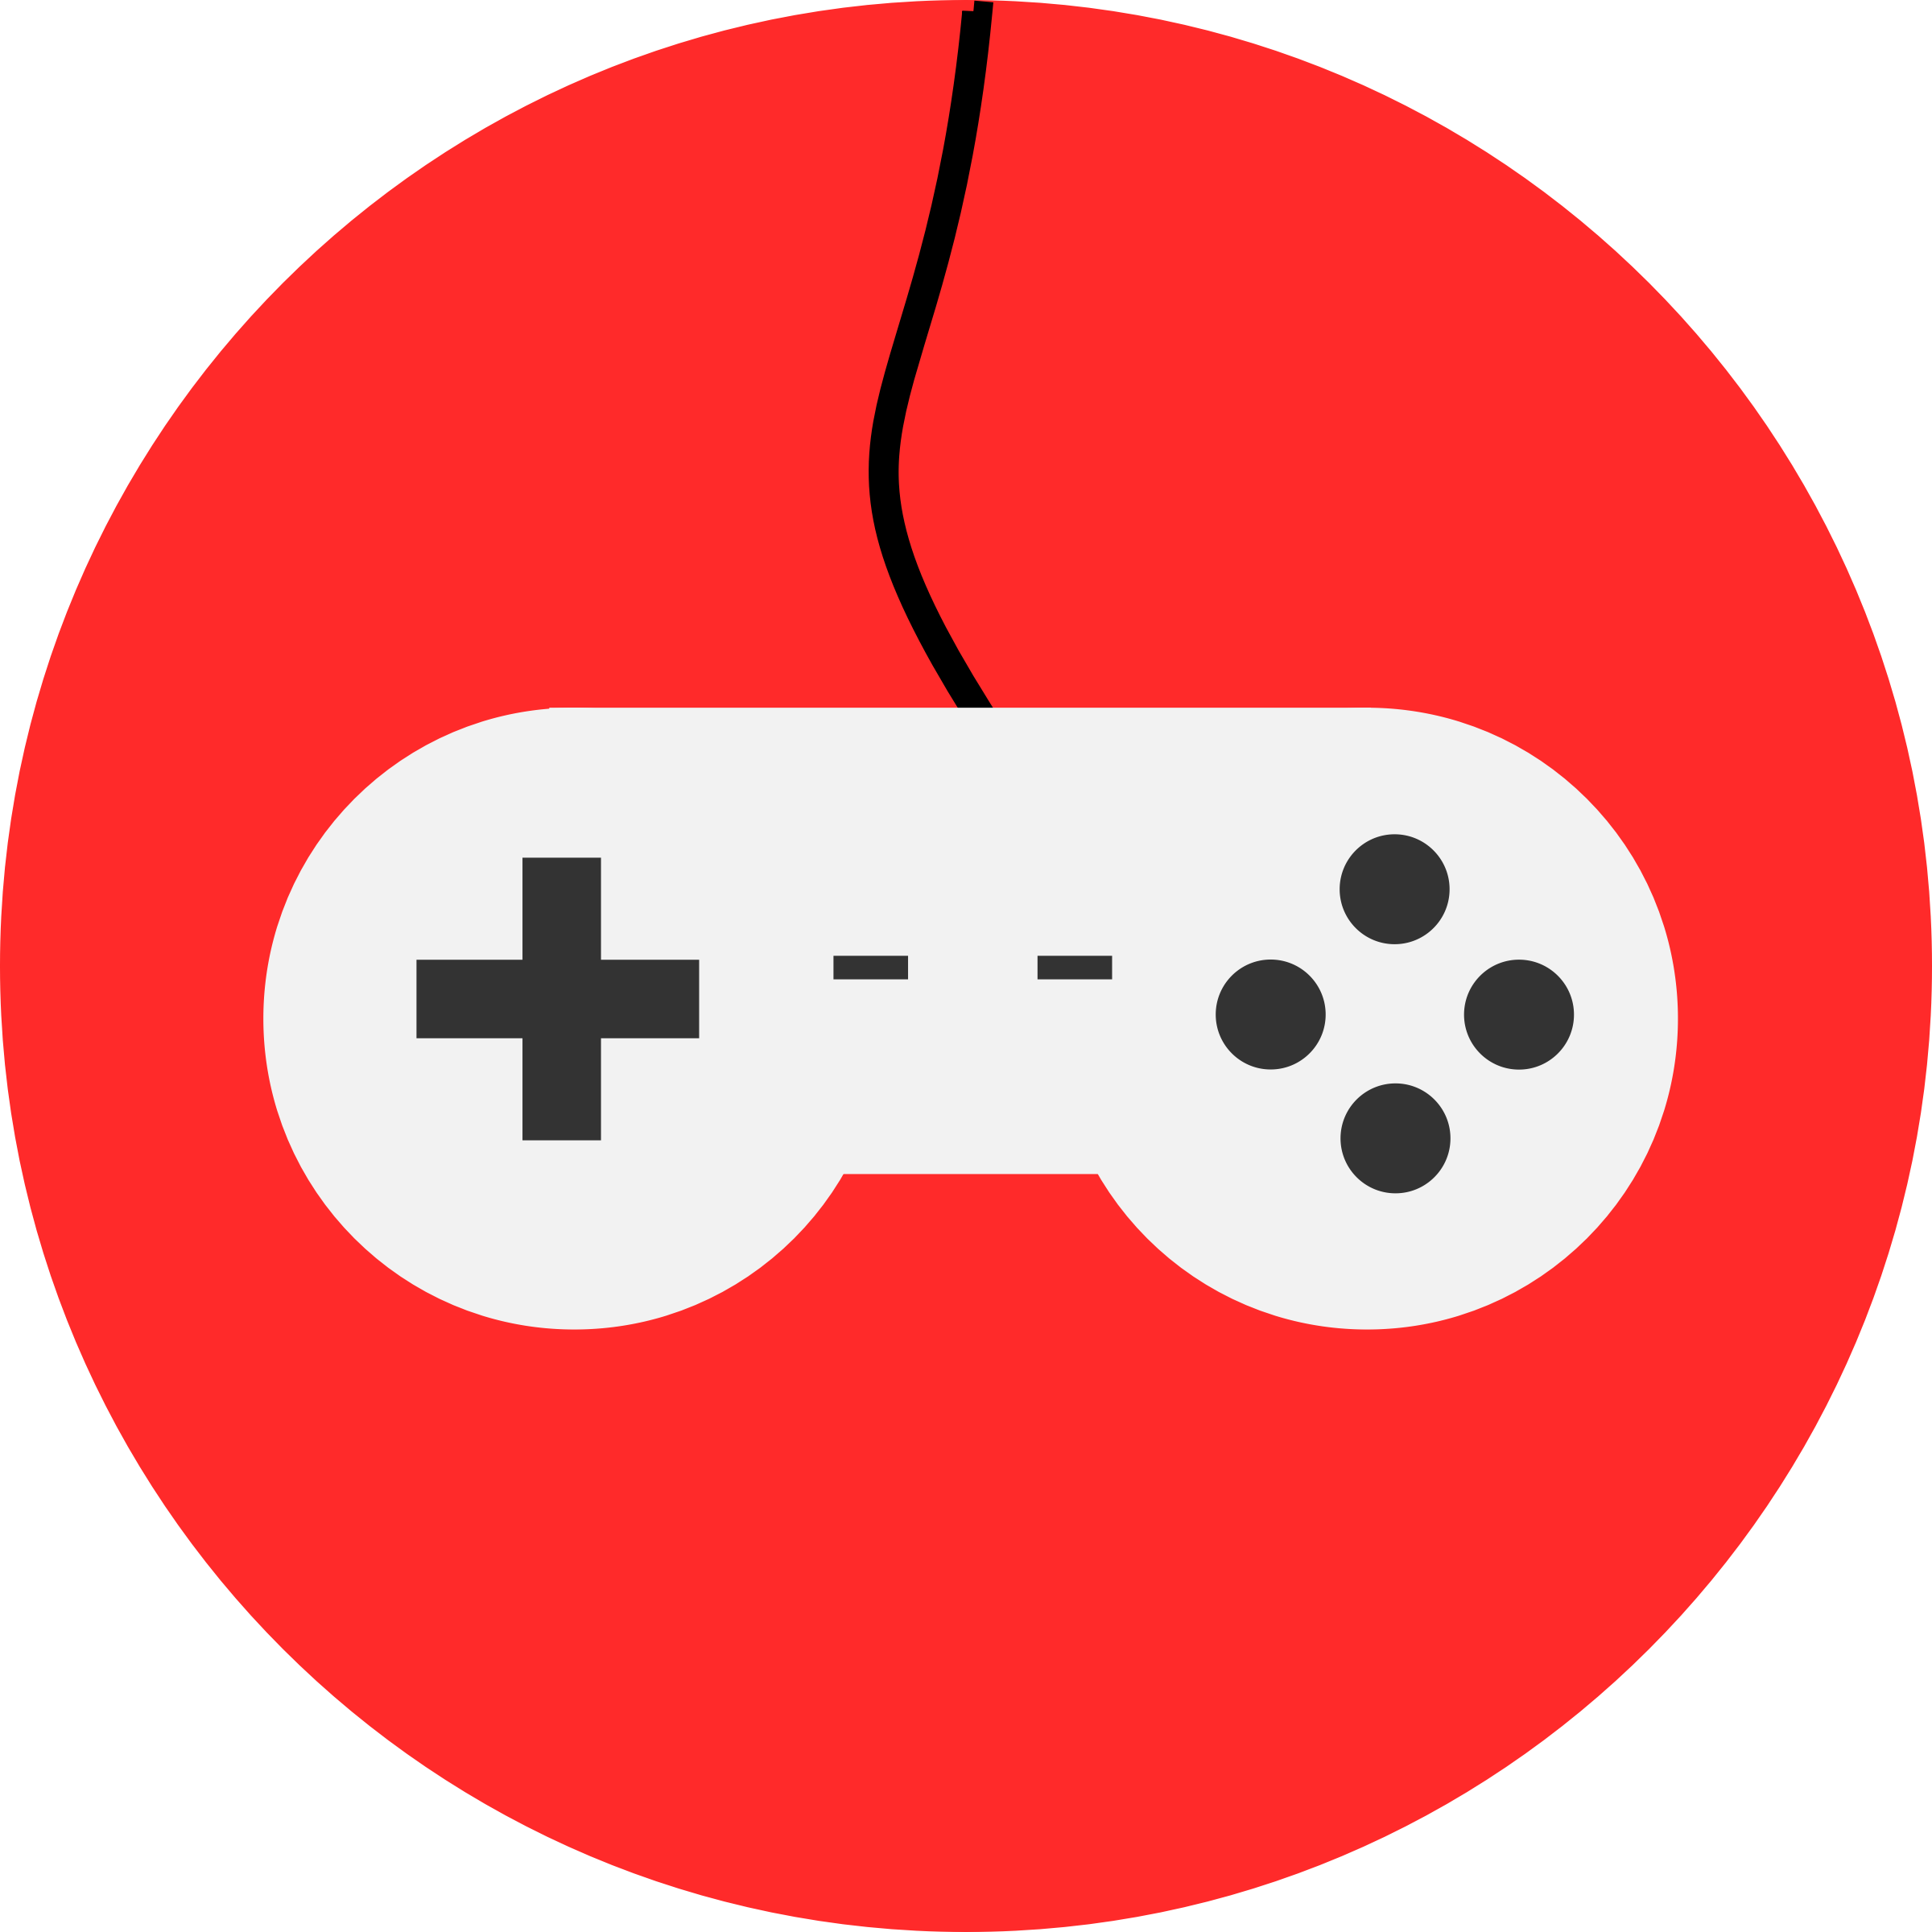 Video game icon big. Controller clipart technology